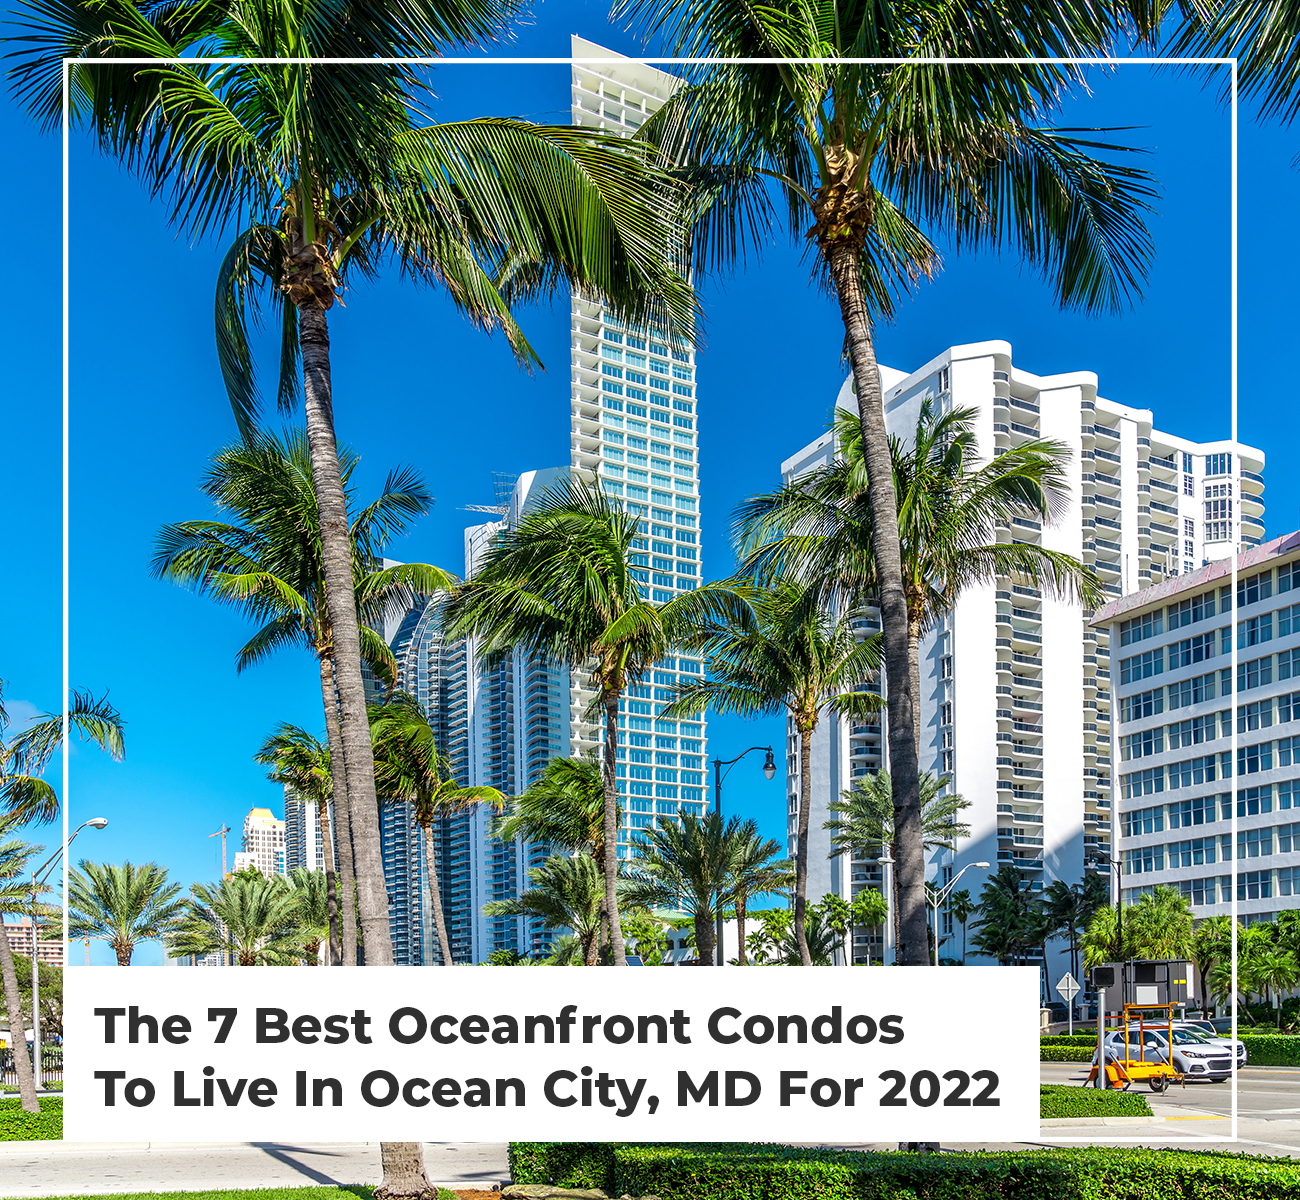 The 7 Best Oceanfront Condos To Live In Ocean City - Main Image